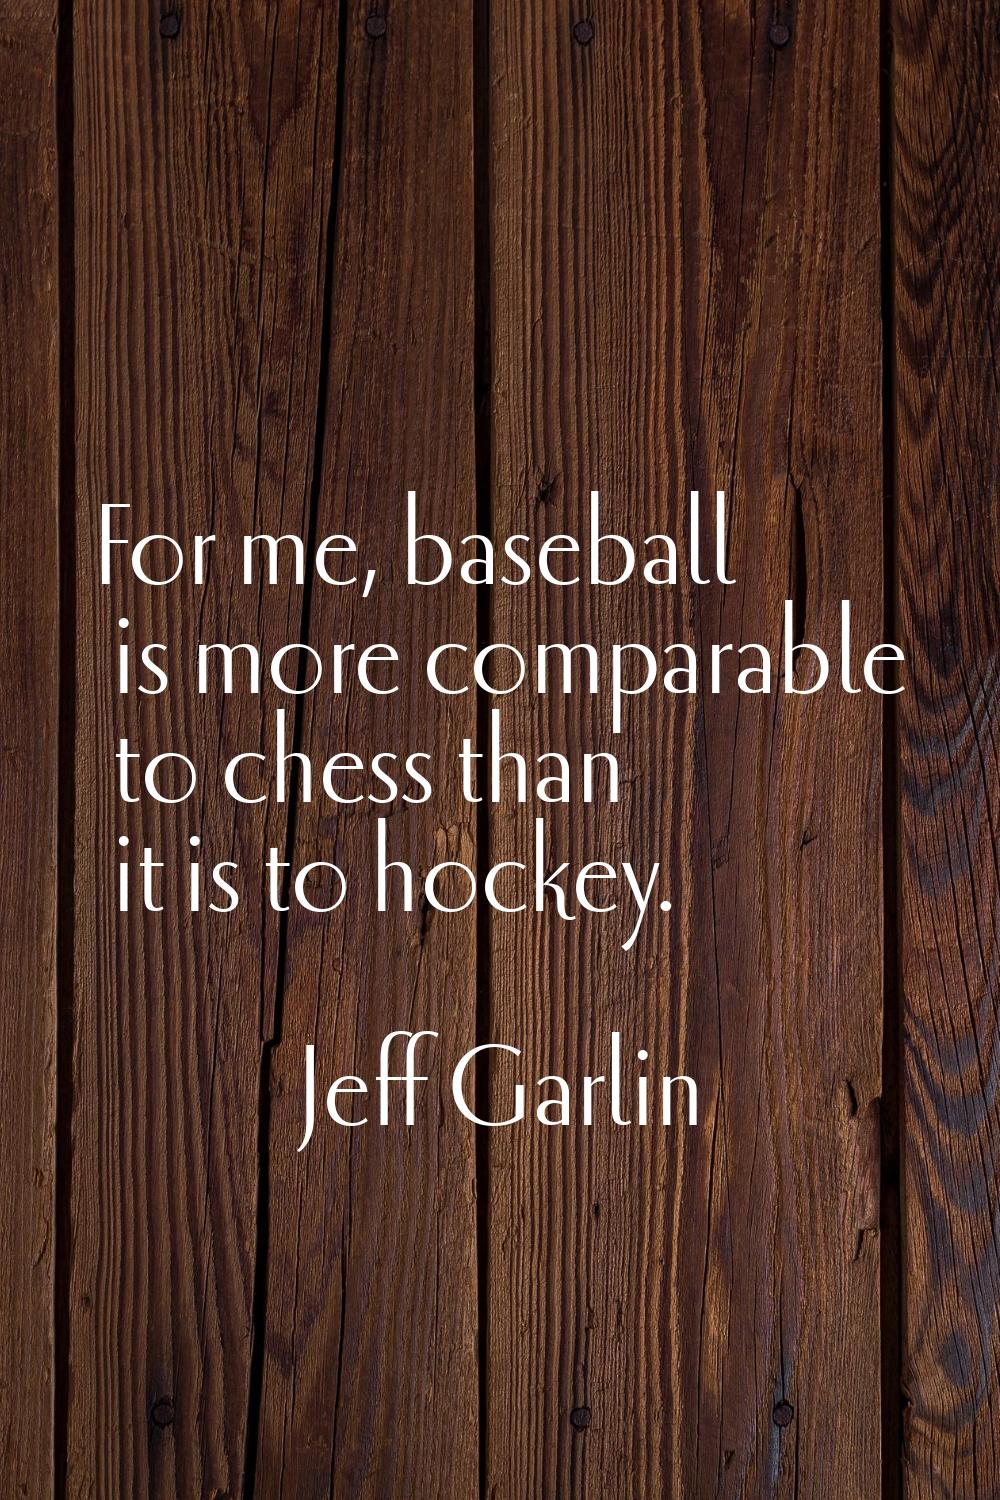 For me, baseball is more comparable to chess than it is to hockey.